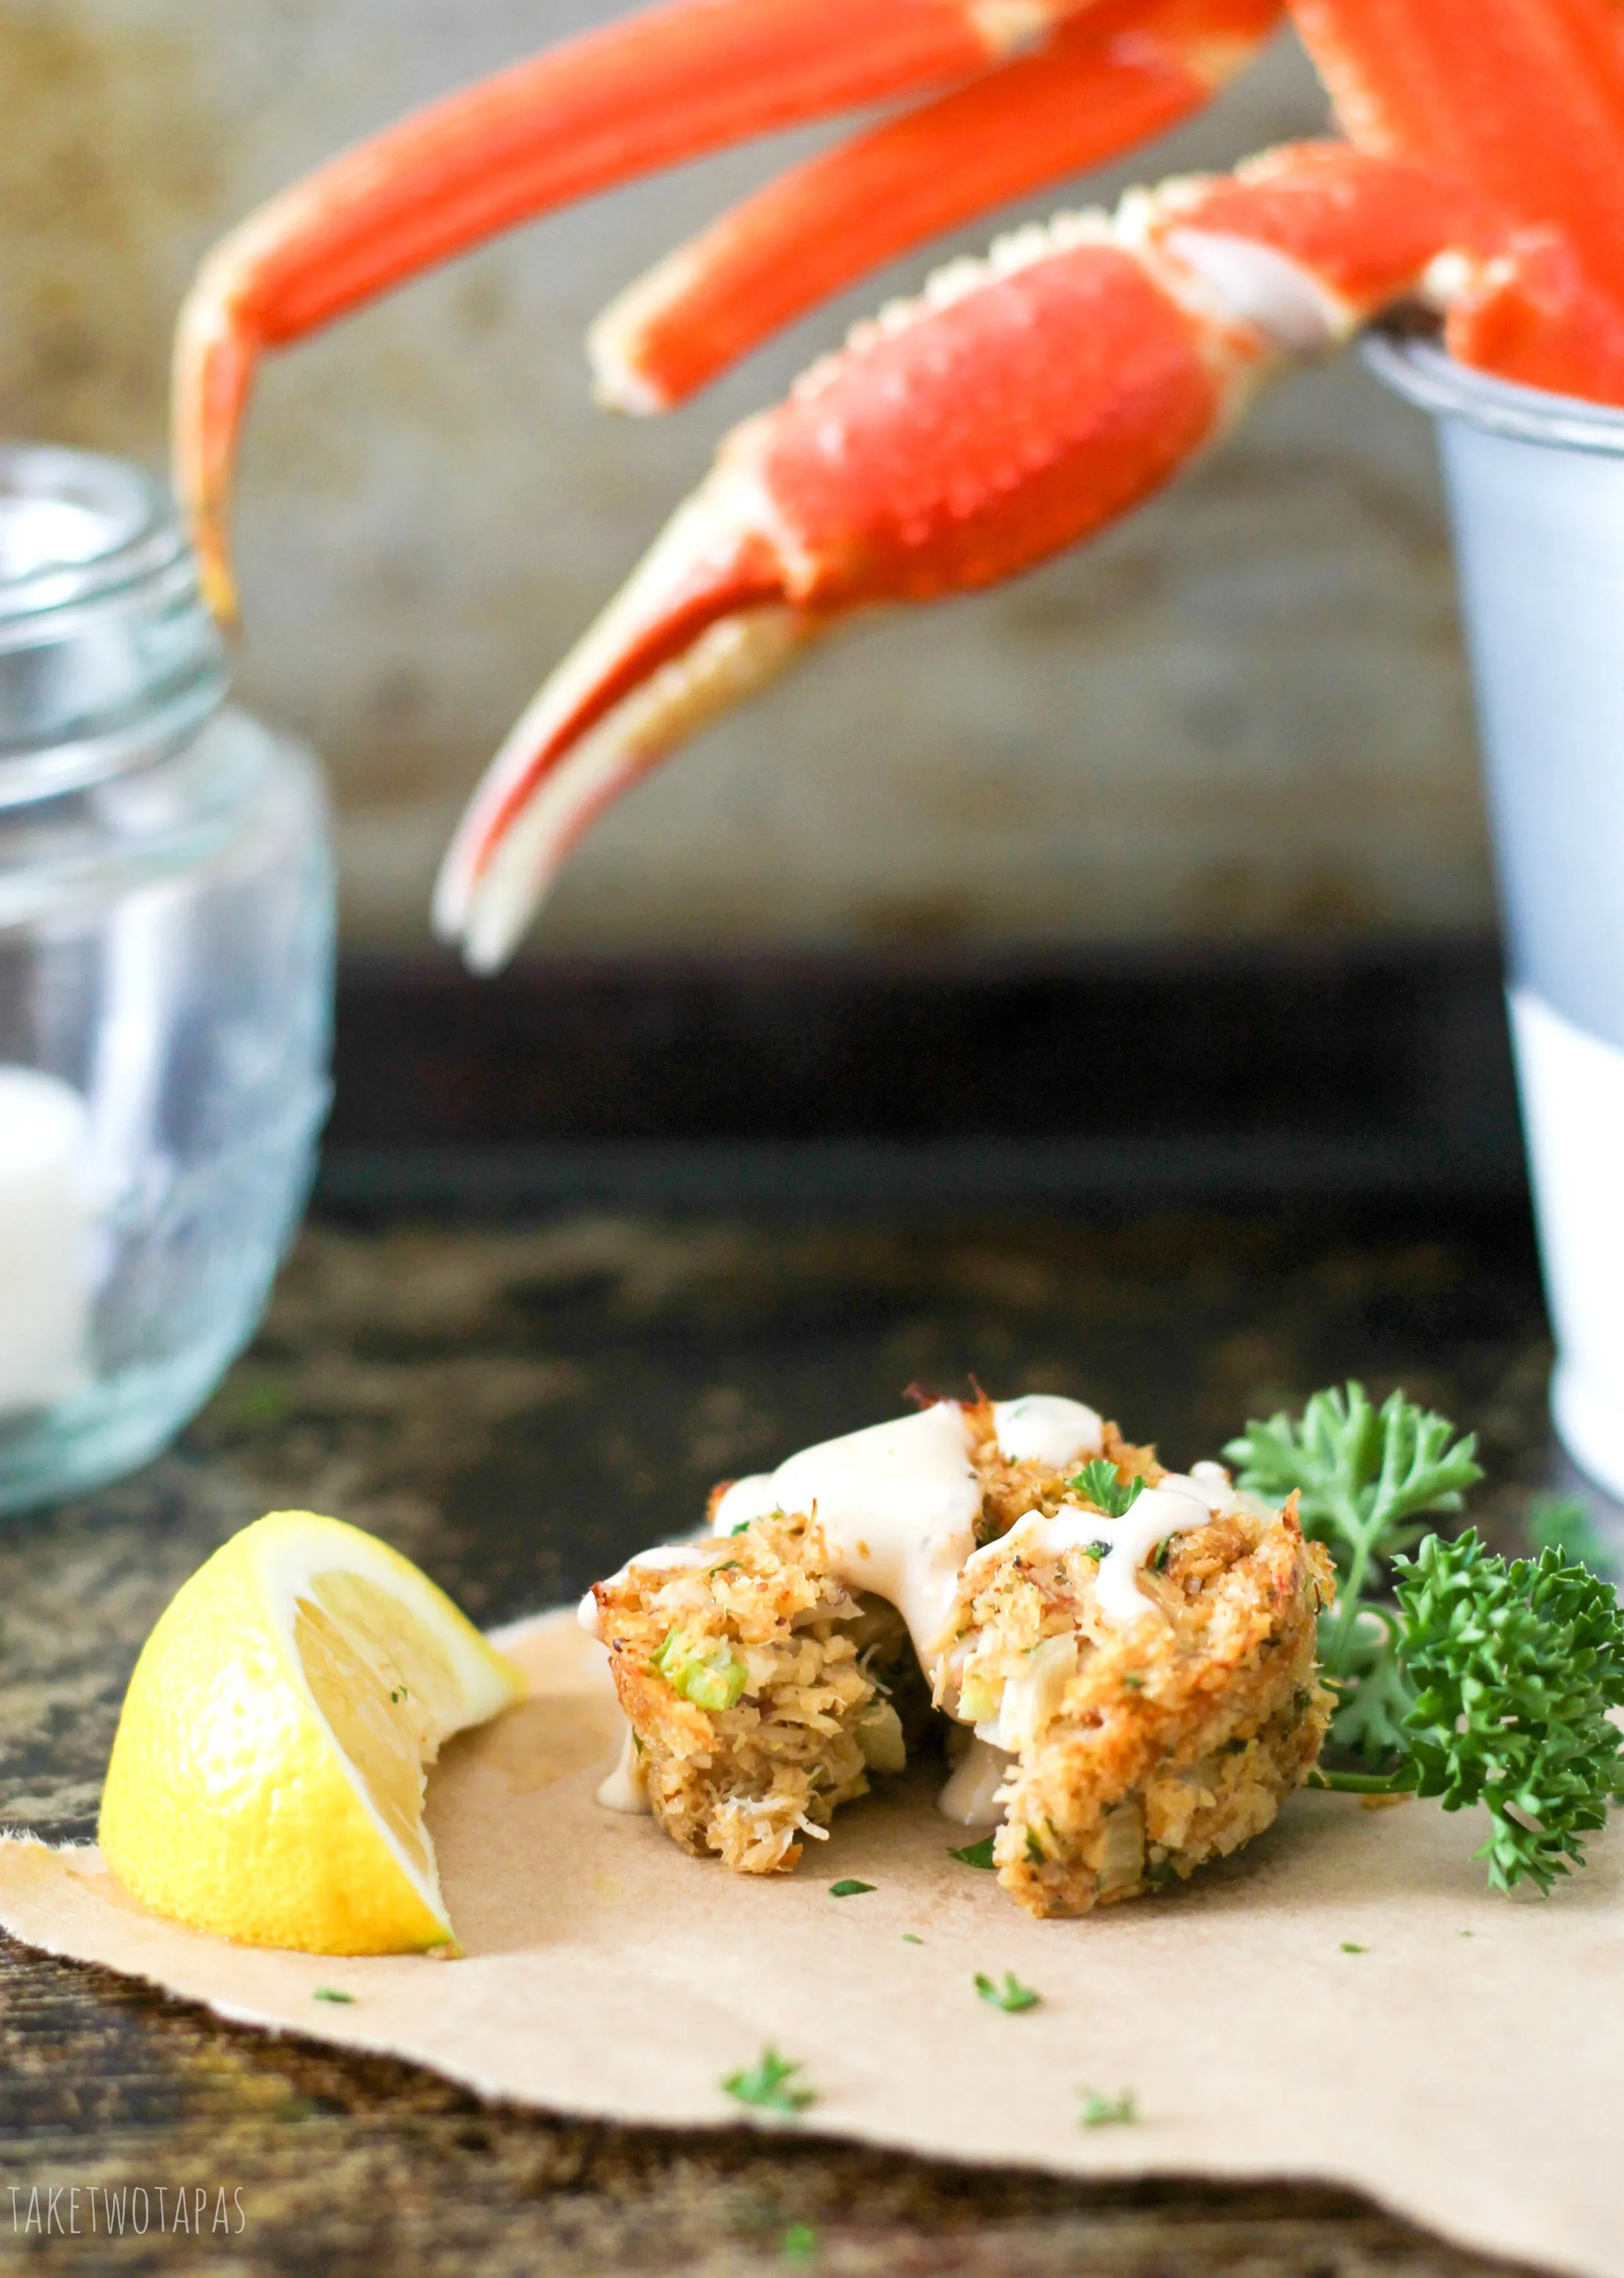 Crab cakes are a great appetizer or main dish for dinner! This Muffin Tin Crab Cakes recipe is full of lump crab meat and have the right amount of spice! Drizzle with Old Bay Remoulade for a treat that will take you to the sea! 